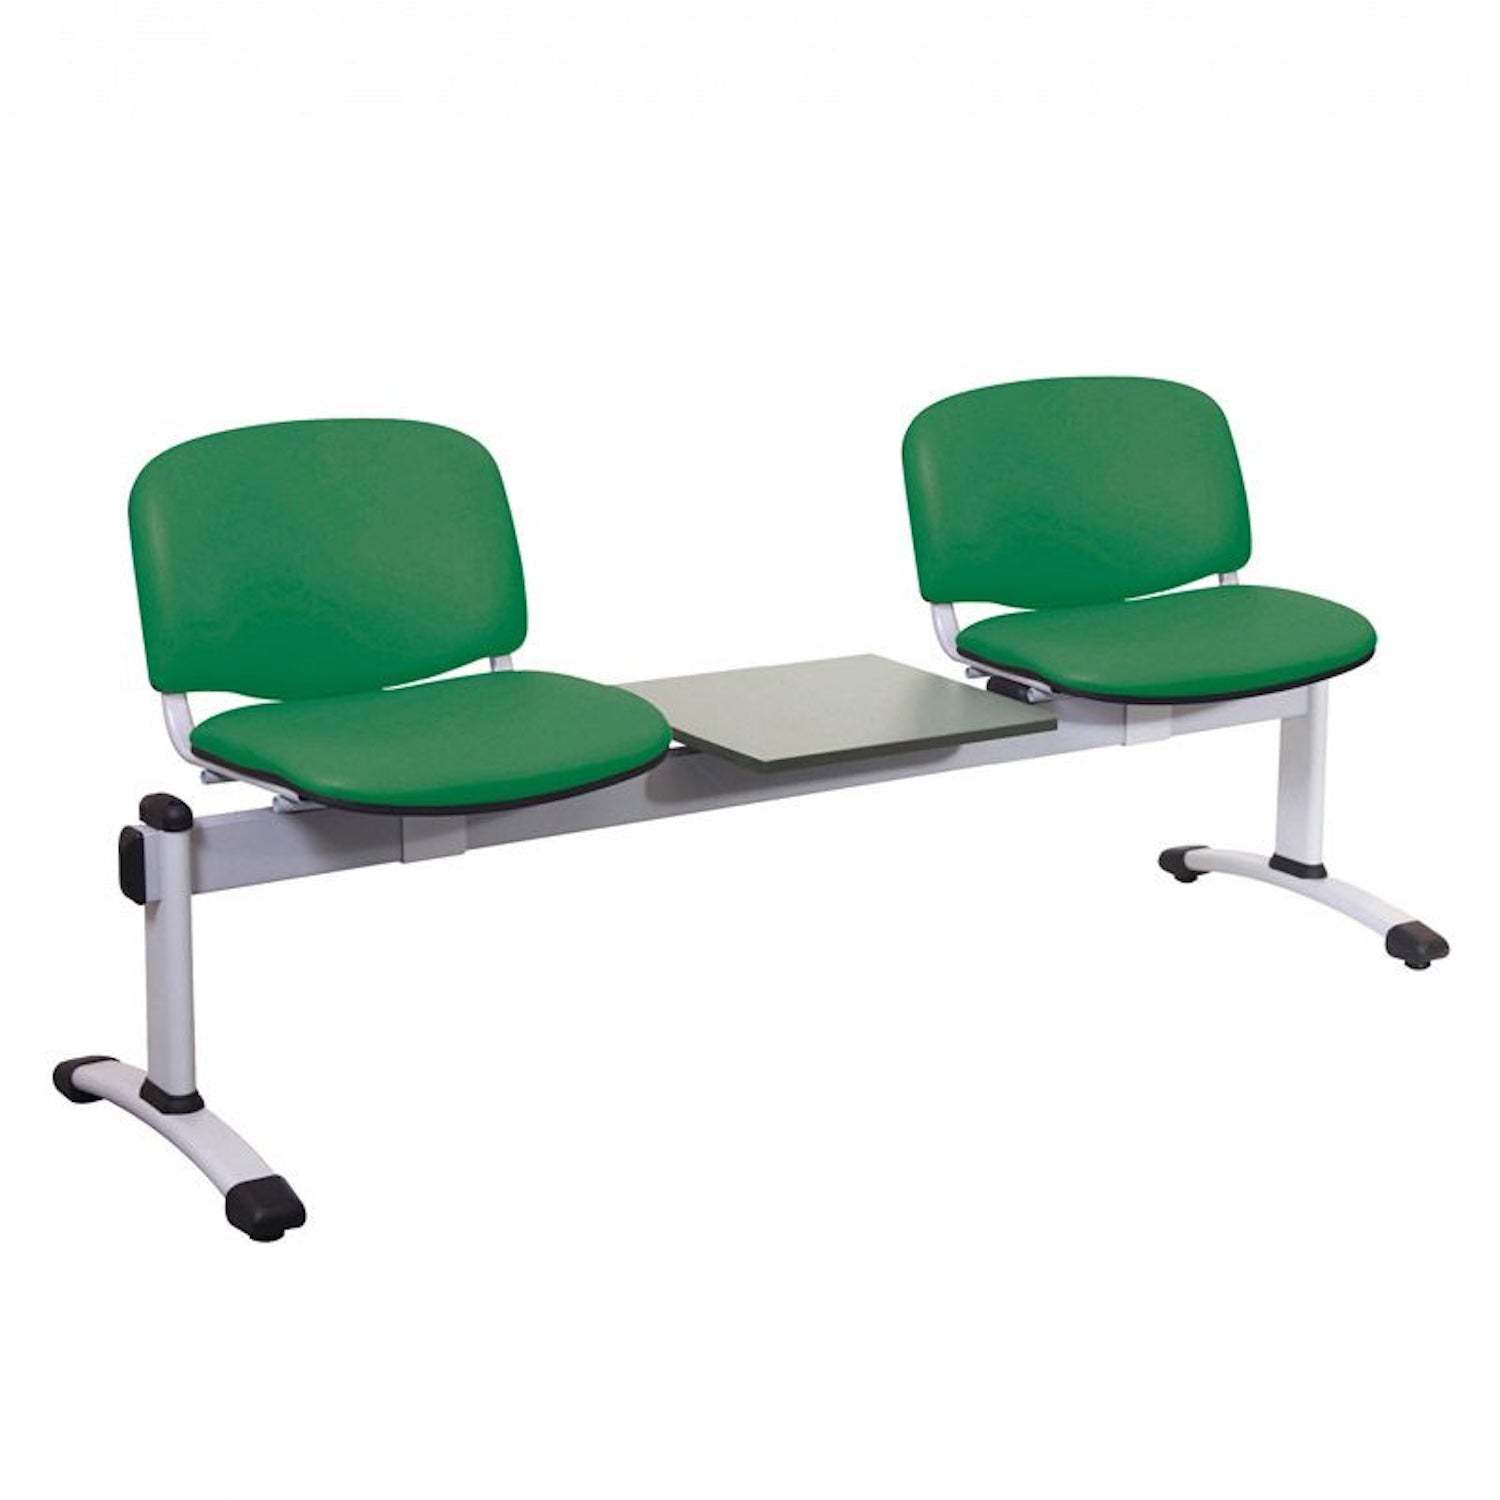 Sunflower Visitor 2 Anti-bacterial Vinyl Upholstery Seats & 1 Table Module in Green